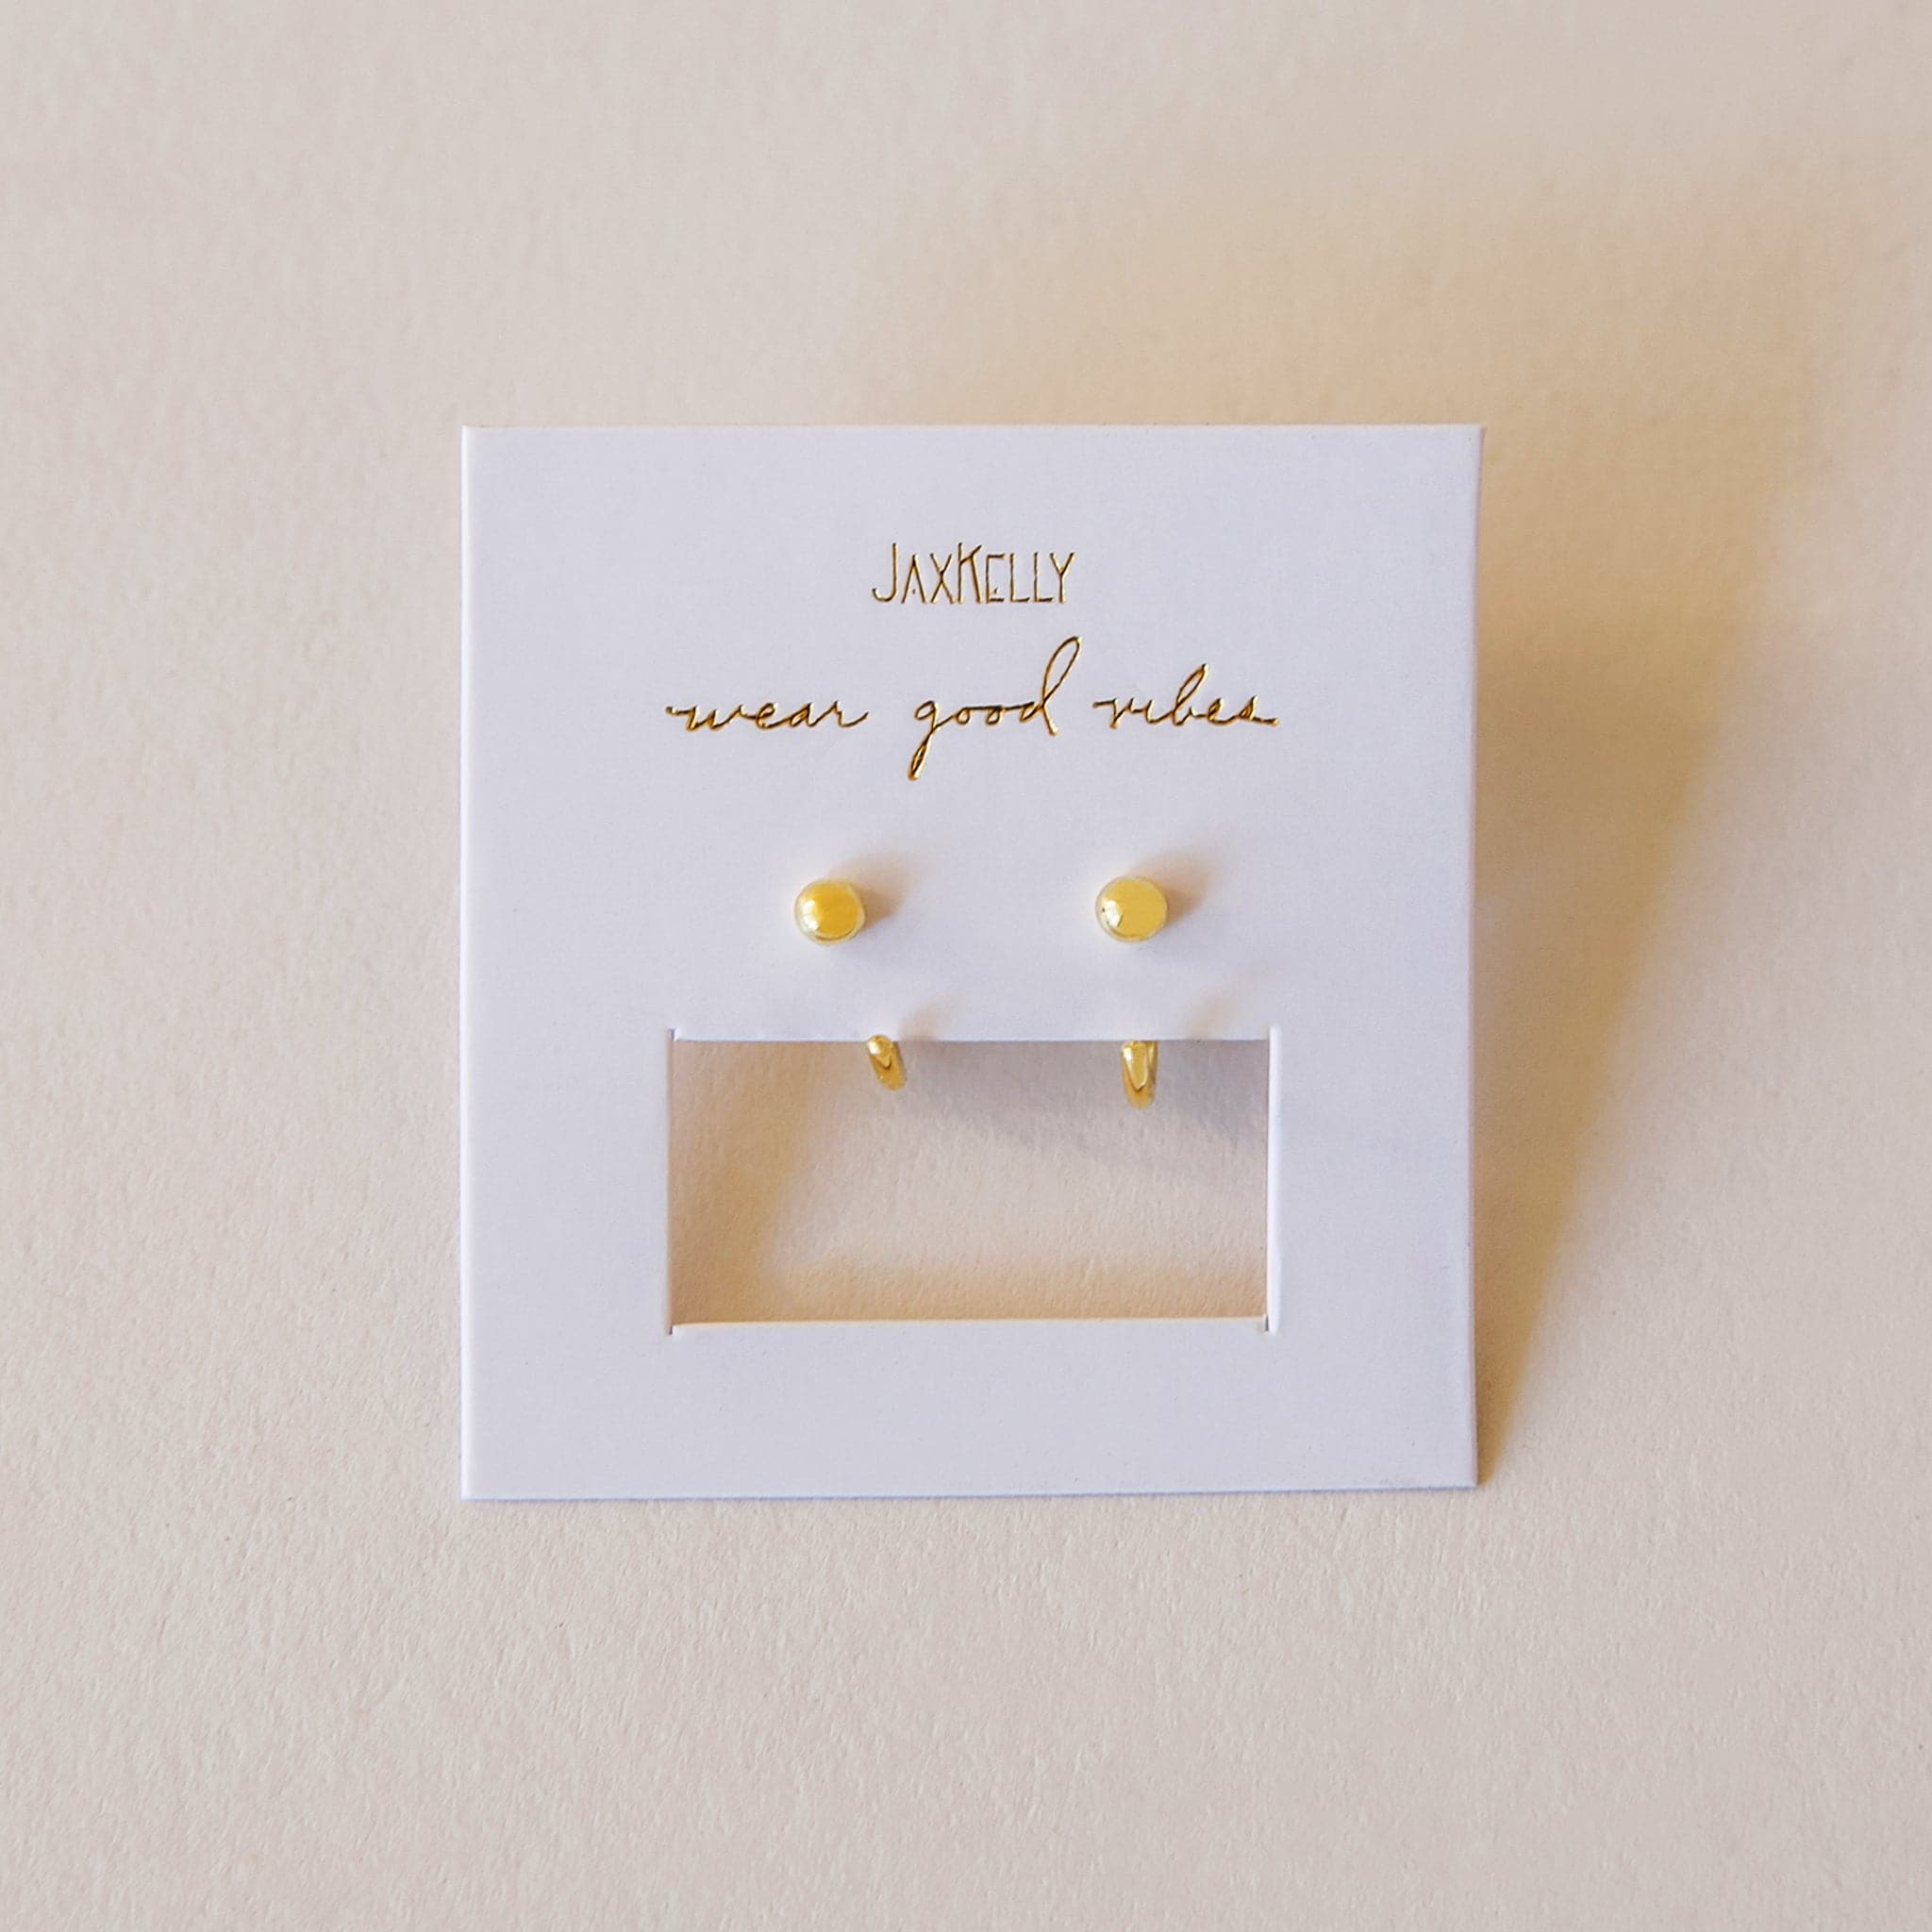 Tiny hoops with a gold sphere on one end, allowing it to have no clasp.